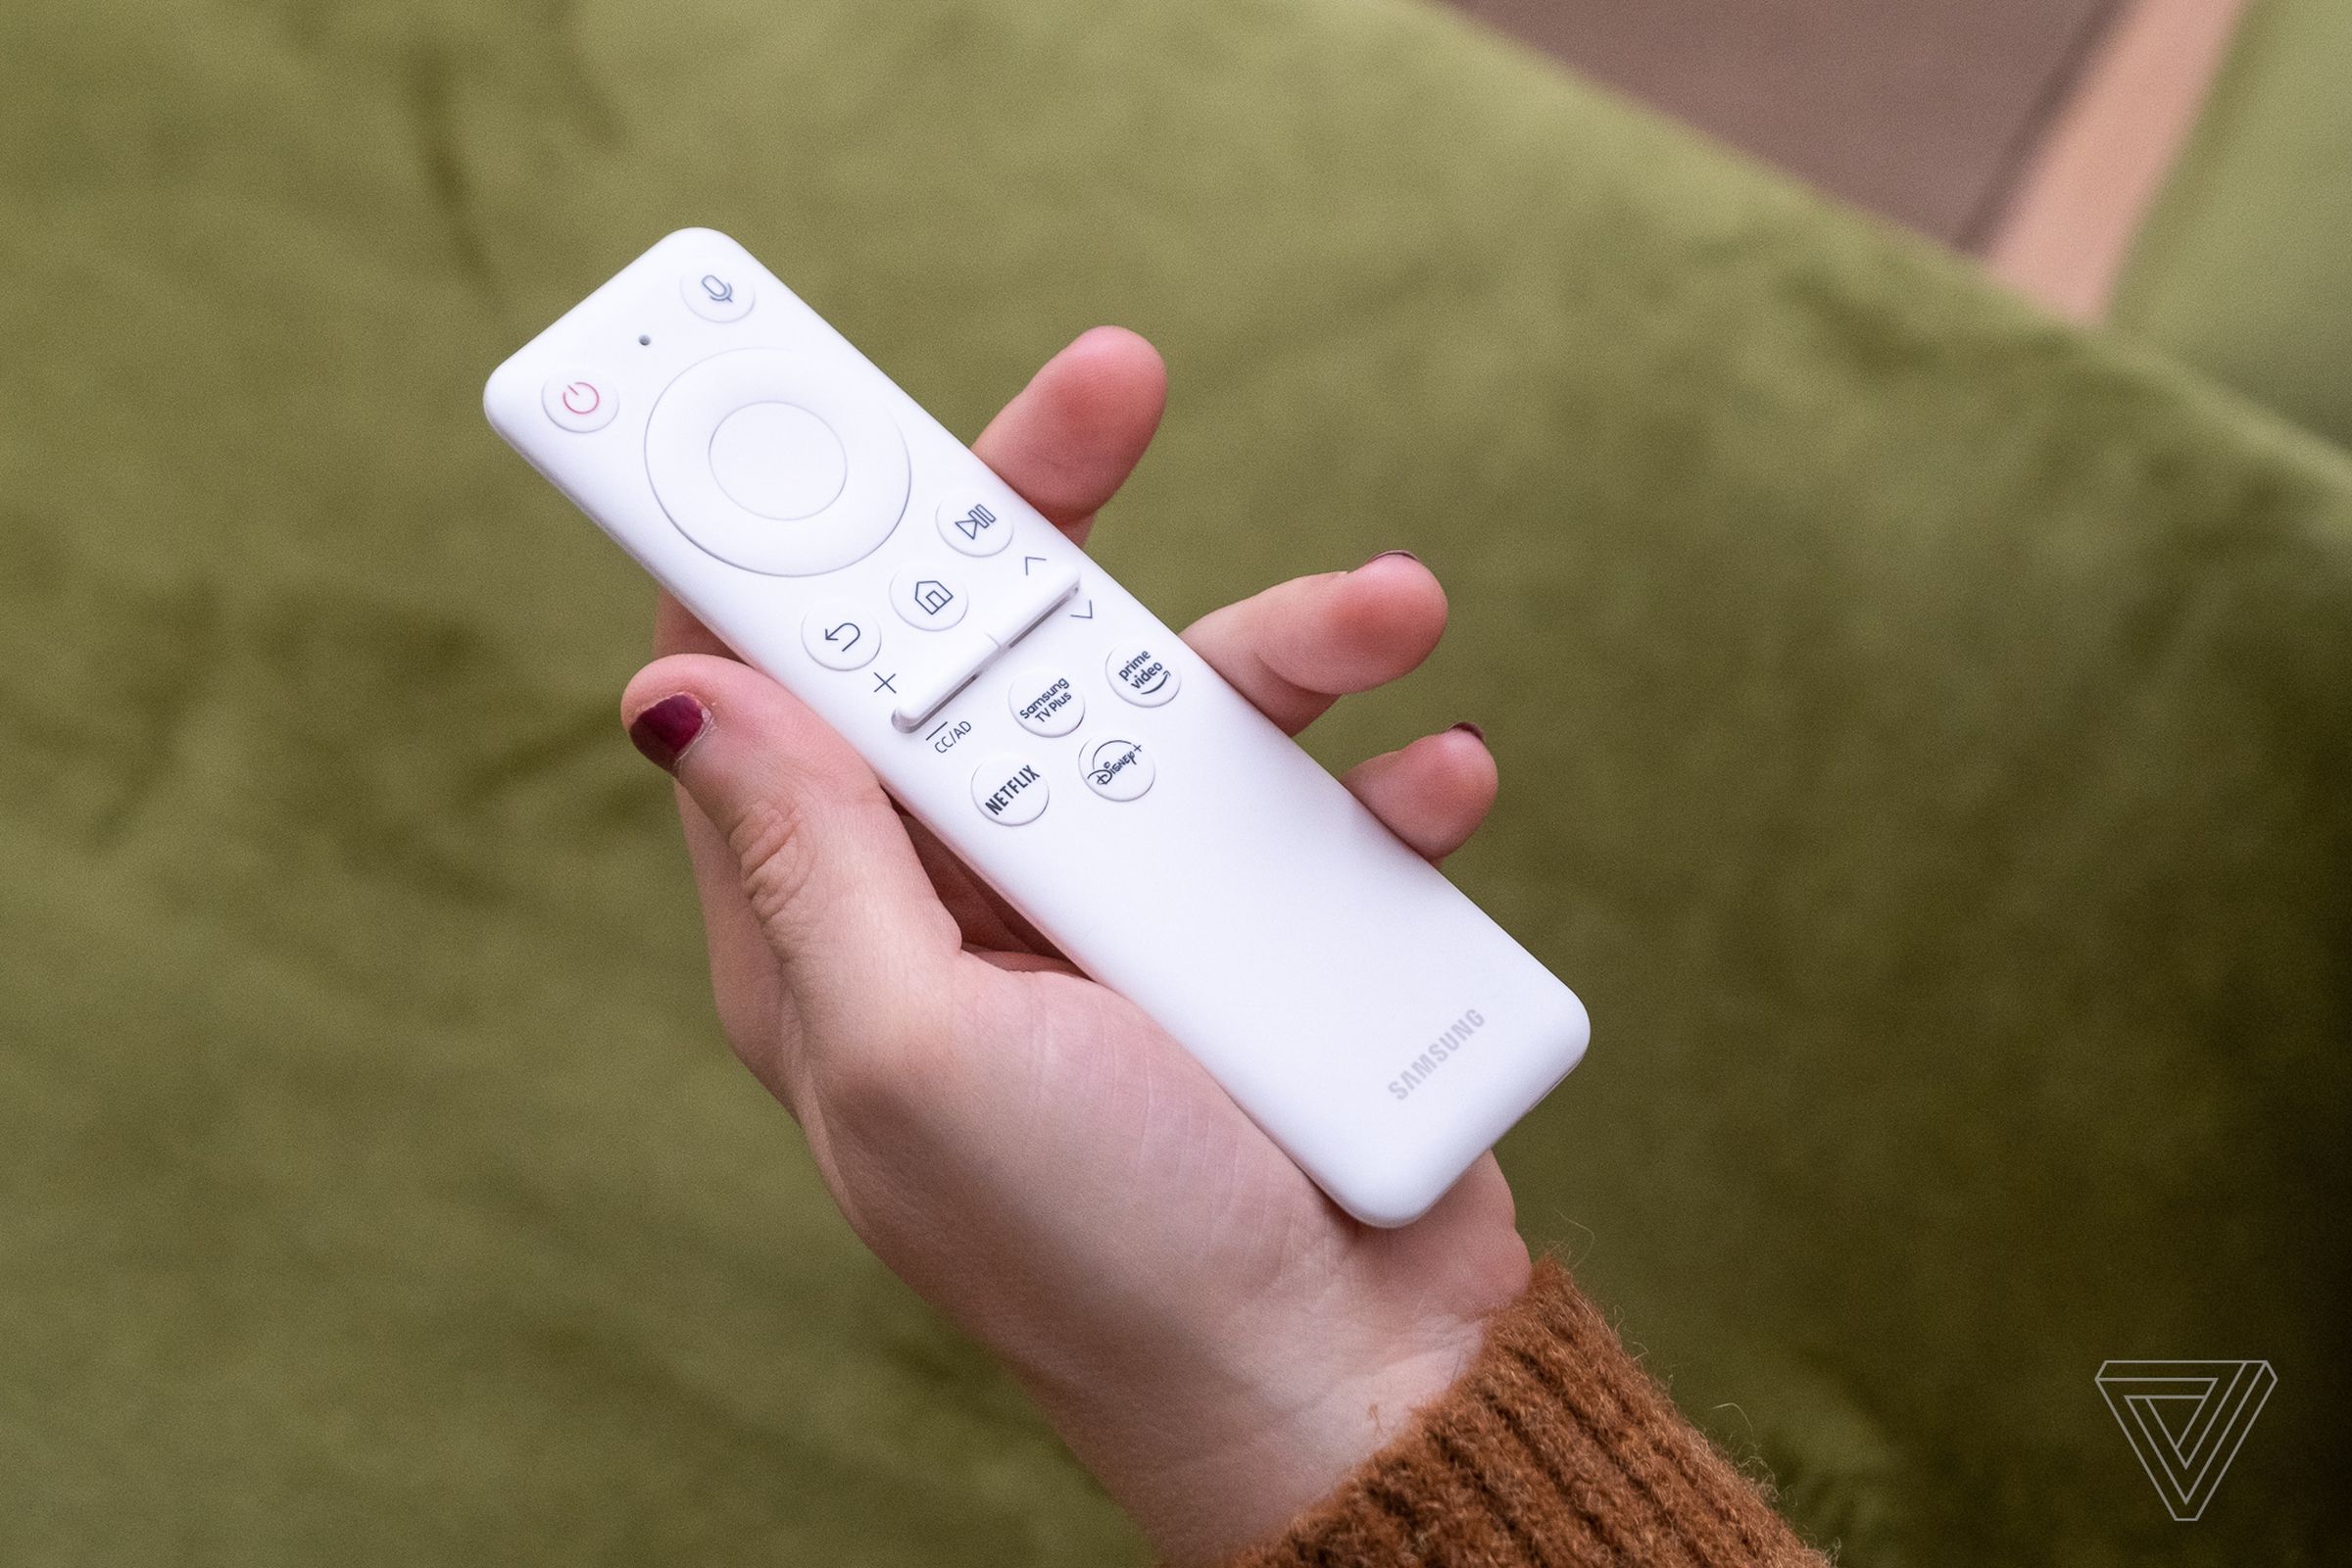 The remote is perfectly adequate and has shortcuts for Netflix and other apps.